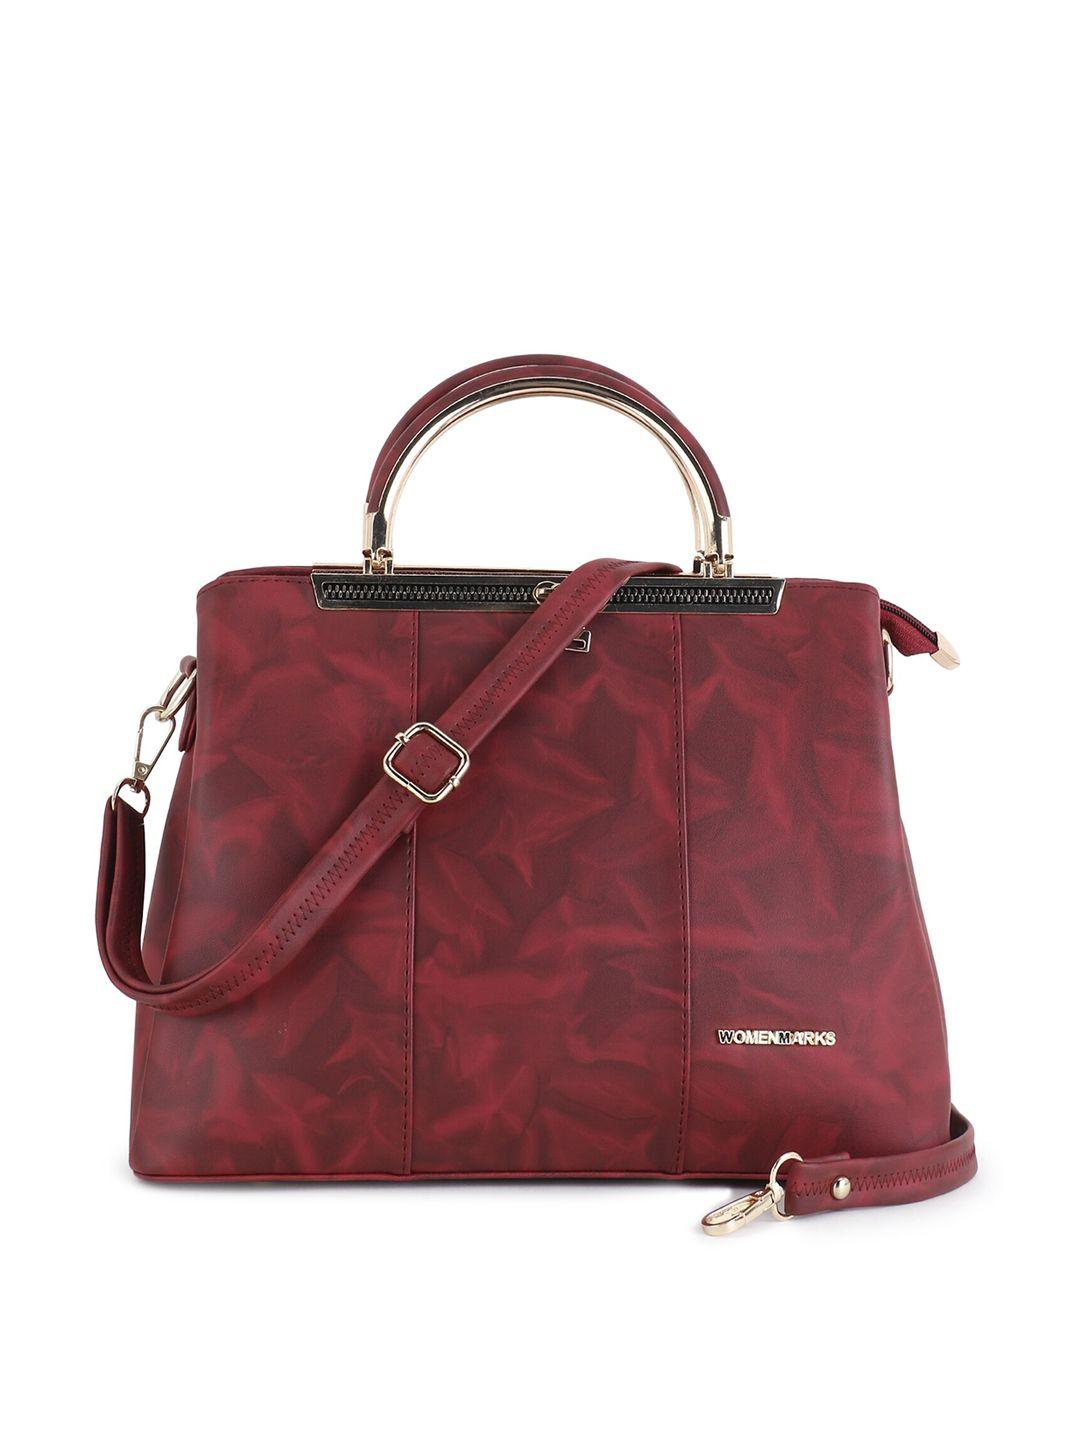 women marks maroon textured pu oversized structured handheld bag with bow detail